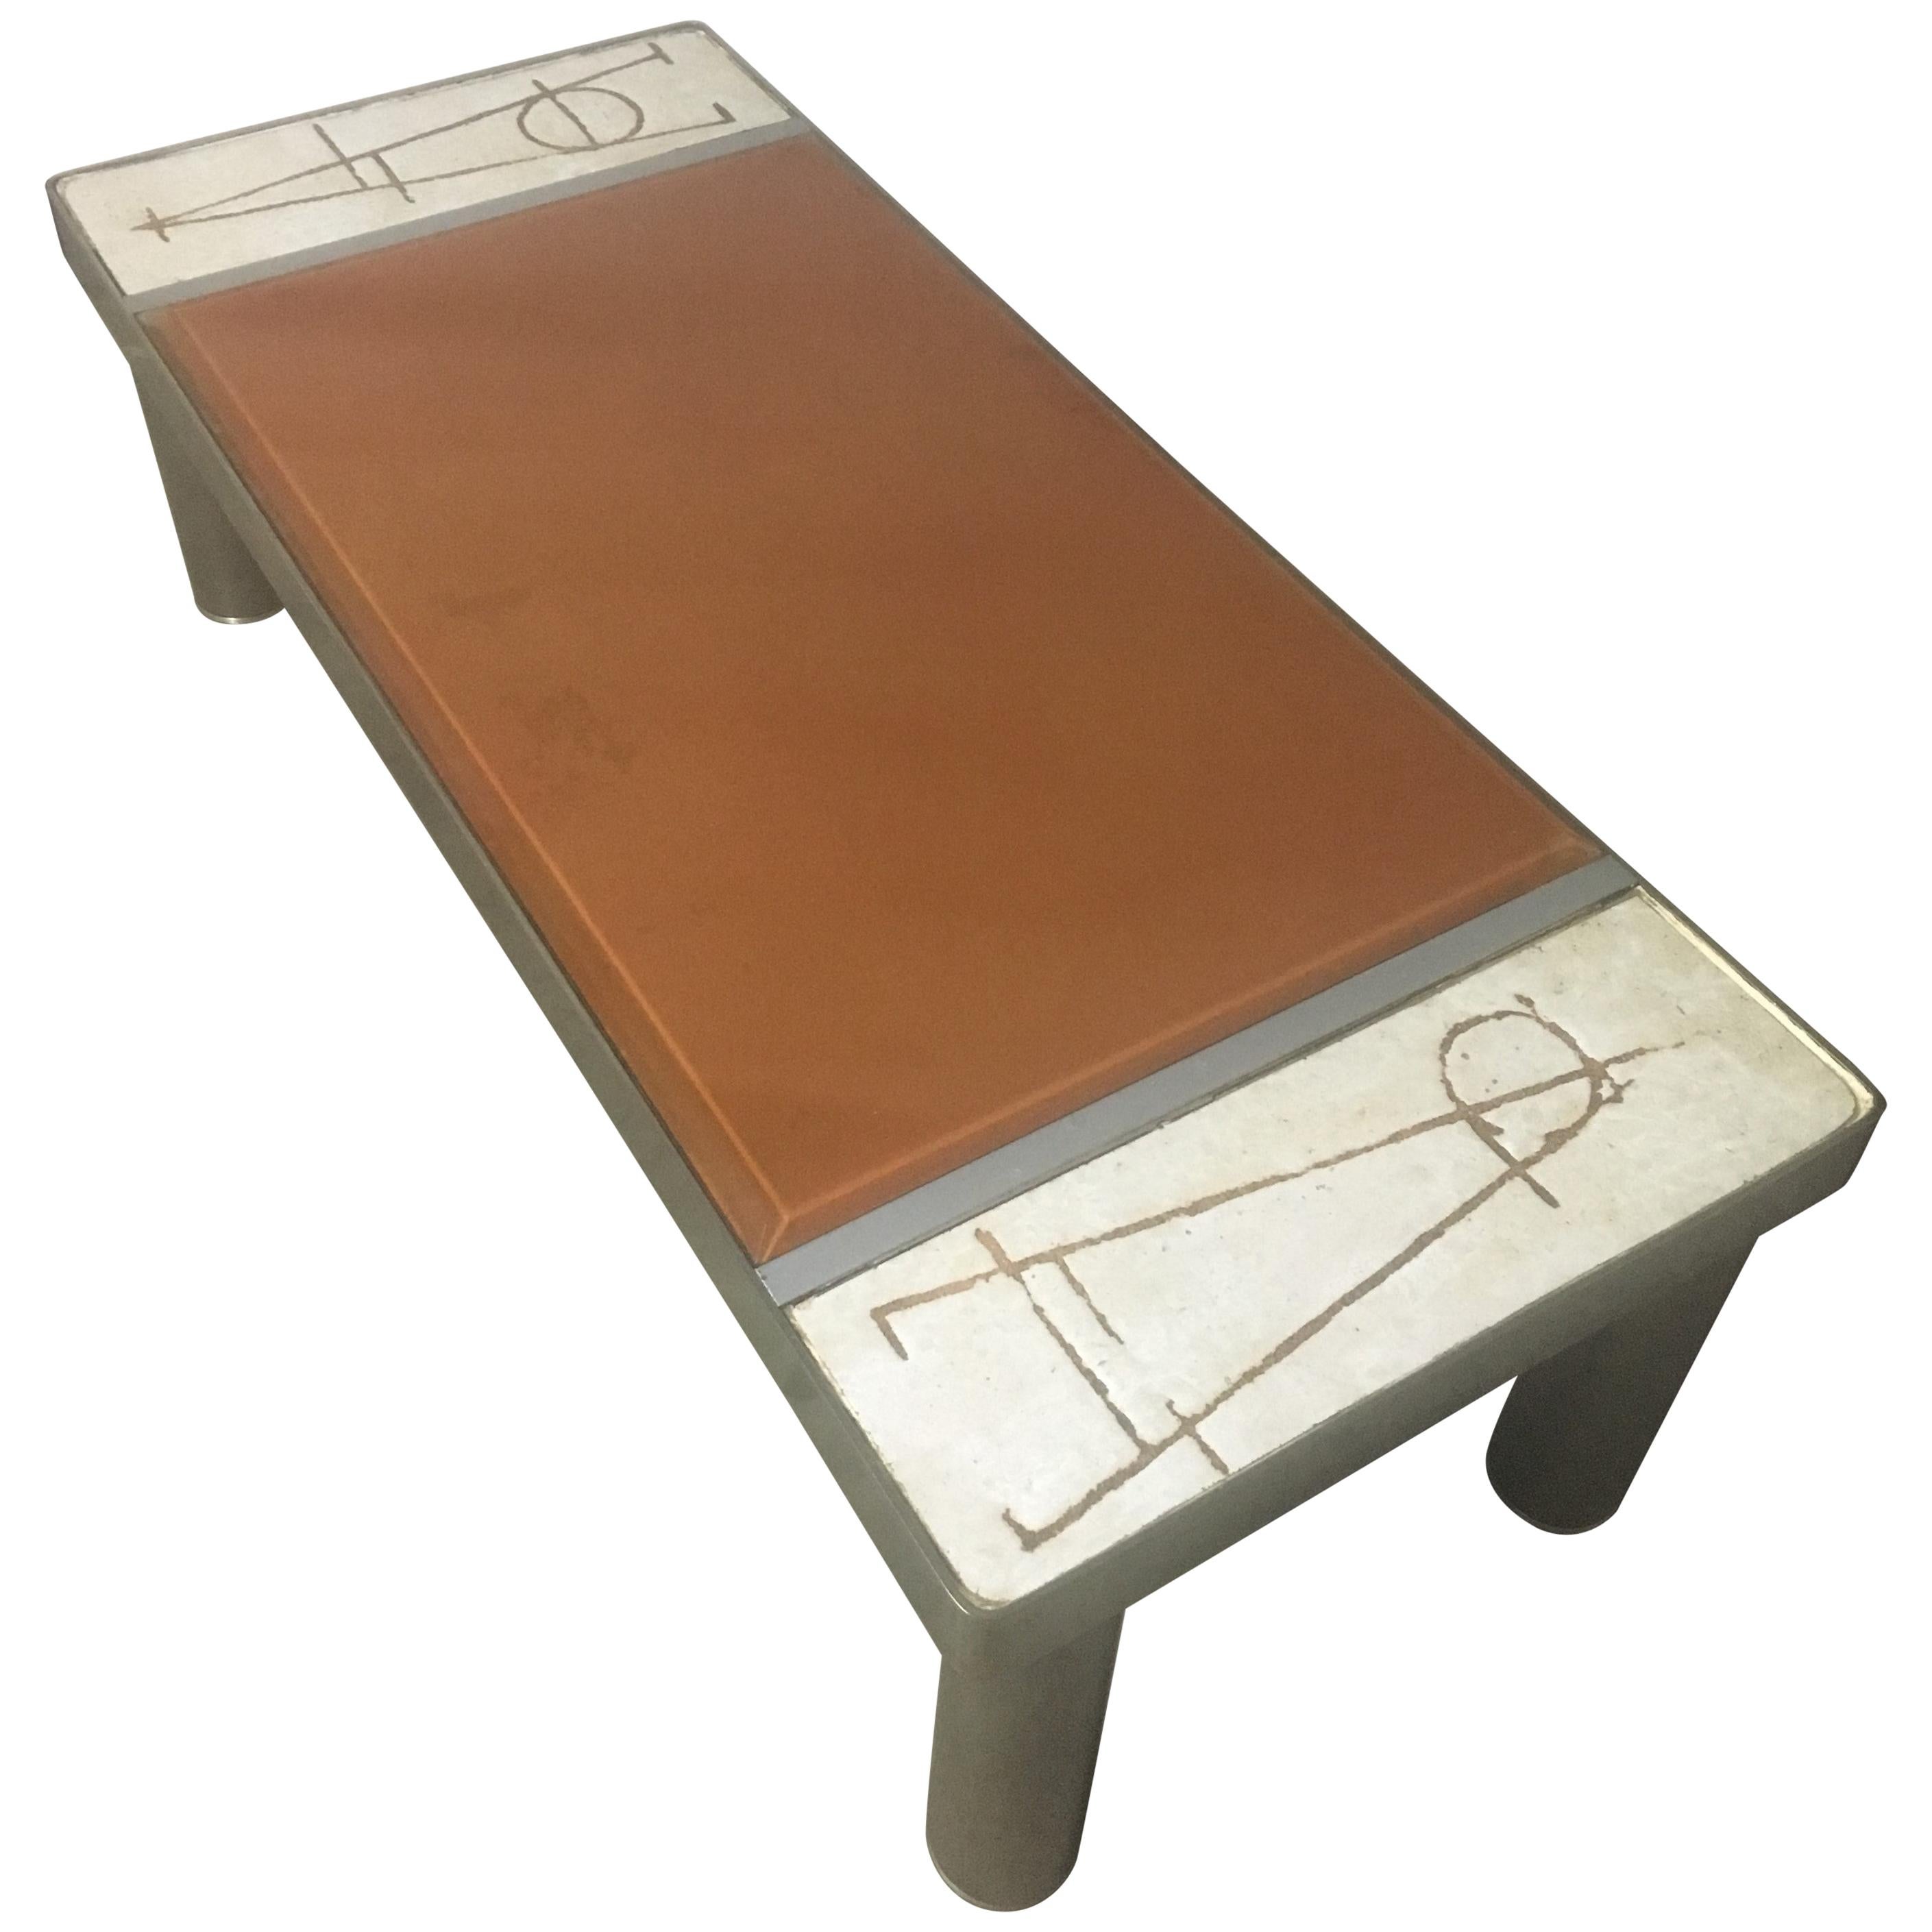 Ceramic and Chromed Metal Rectangular Coffee Table, Brown Glass Slab Top, 1970s For Sale